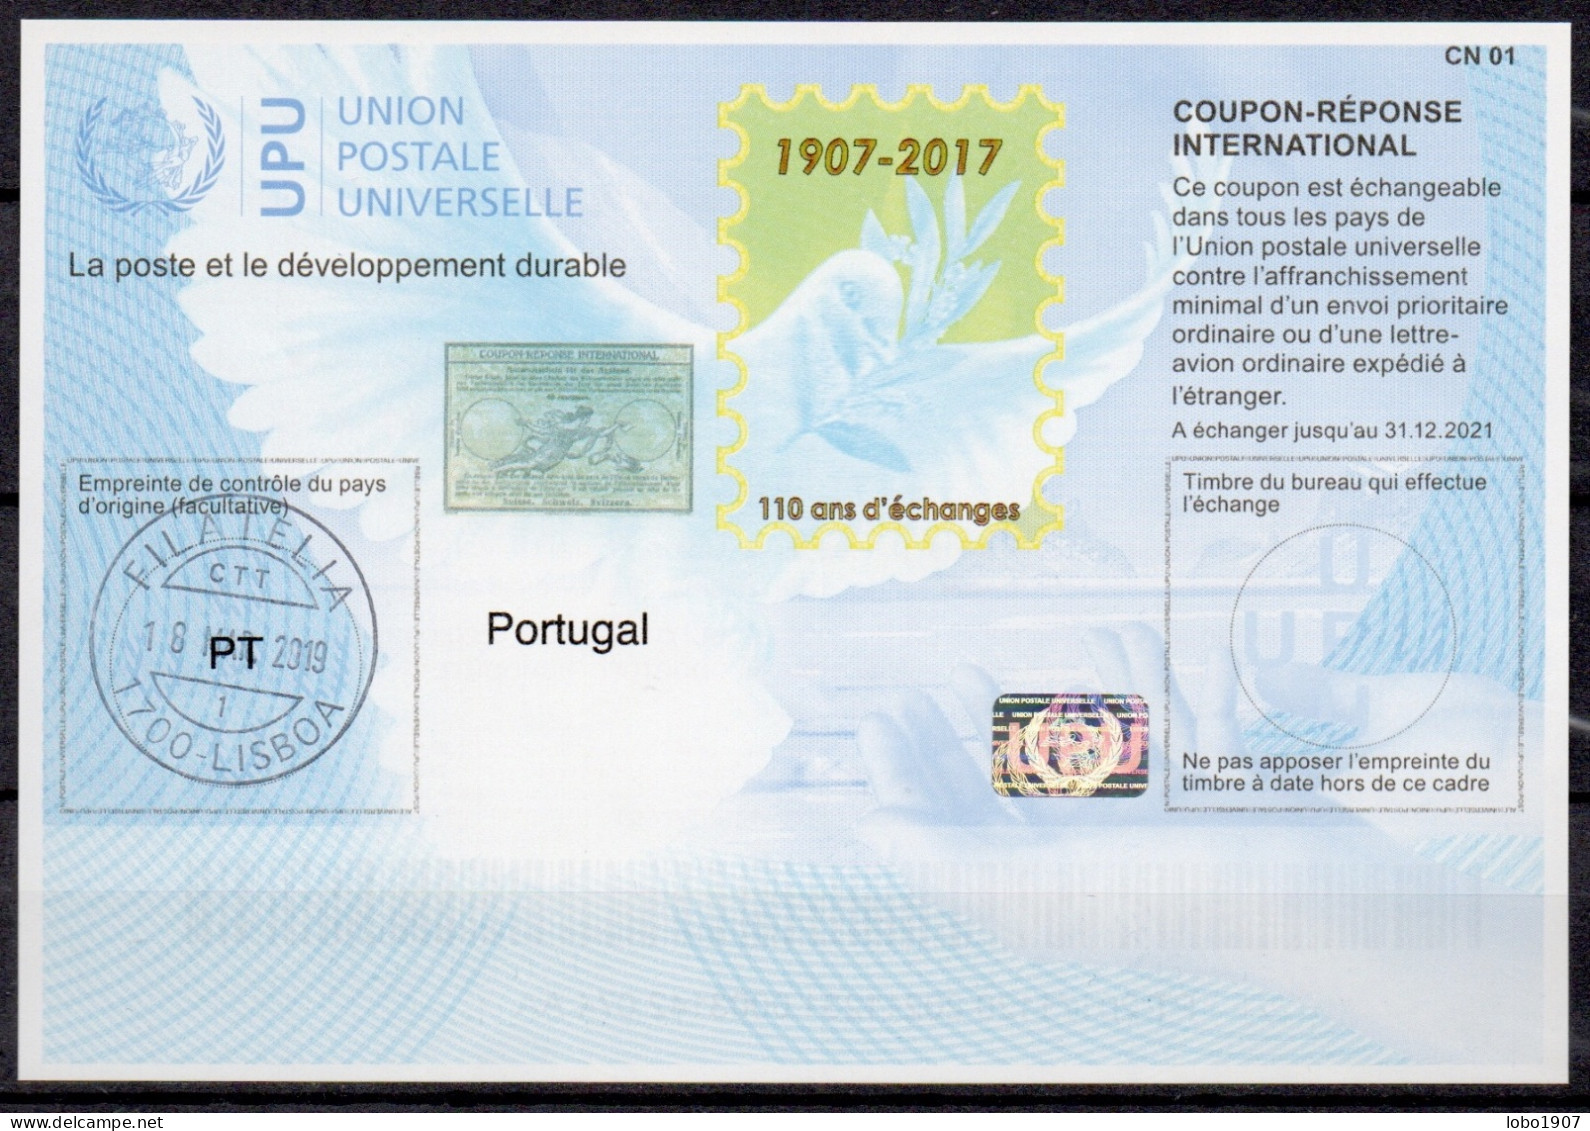 PORTUGAL  Is42  20171120 AA International Reply Coupon Reponse Antwortschein Cupao Resposta IRC IAS  O LISBOA 18.03.2019 - Postal Stationery